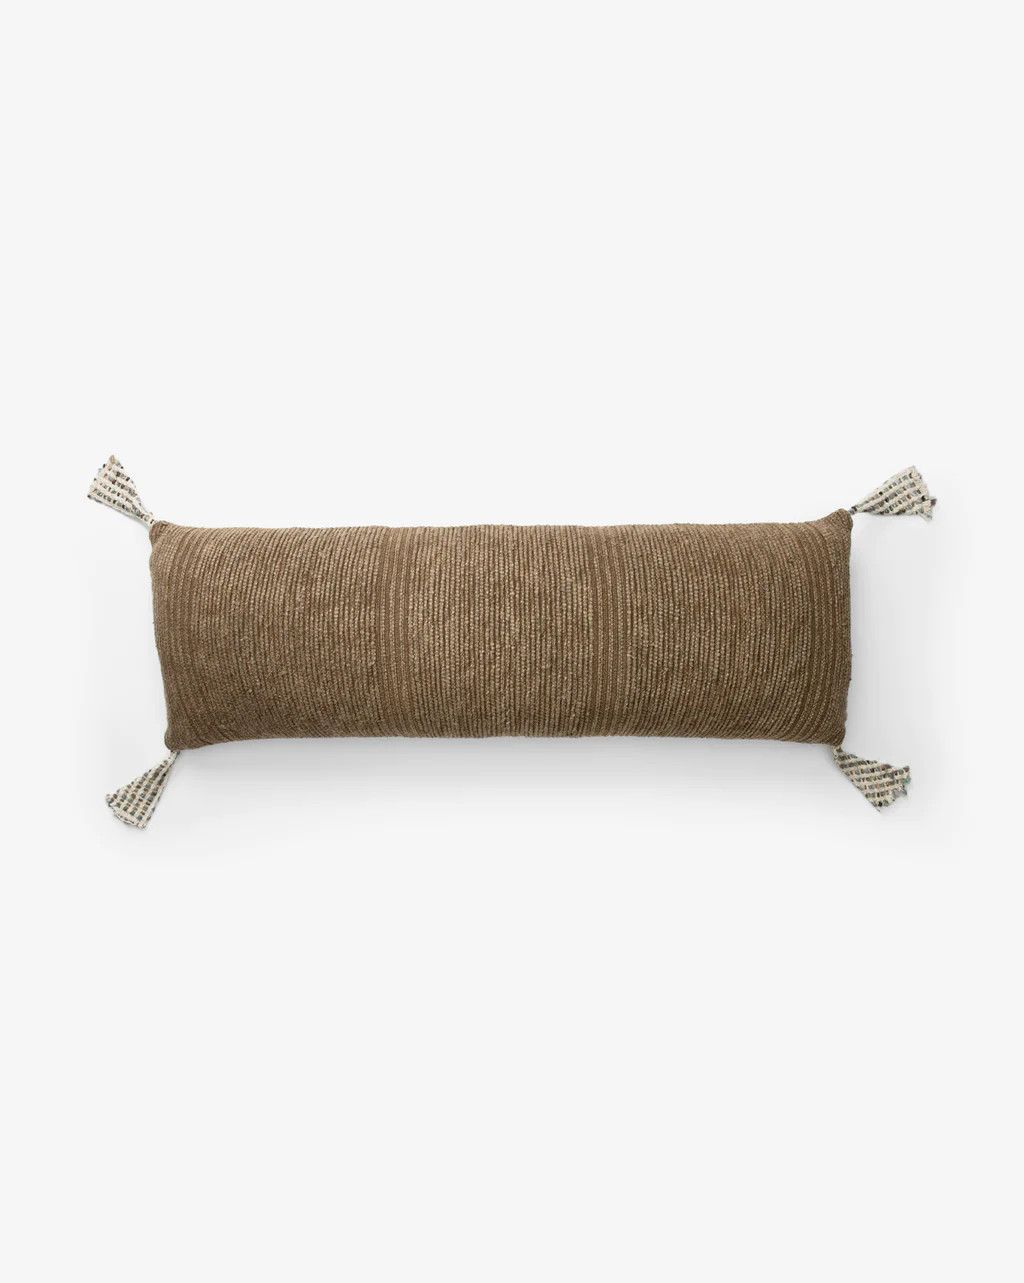 Bruna Pillow Cover | McGee & Co.